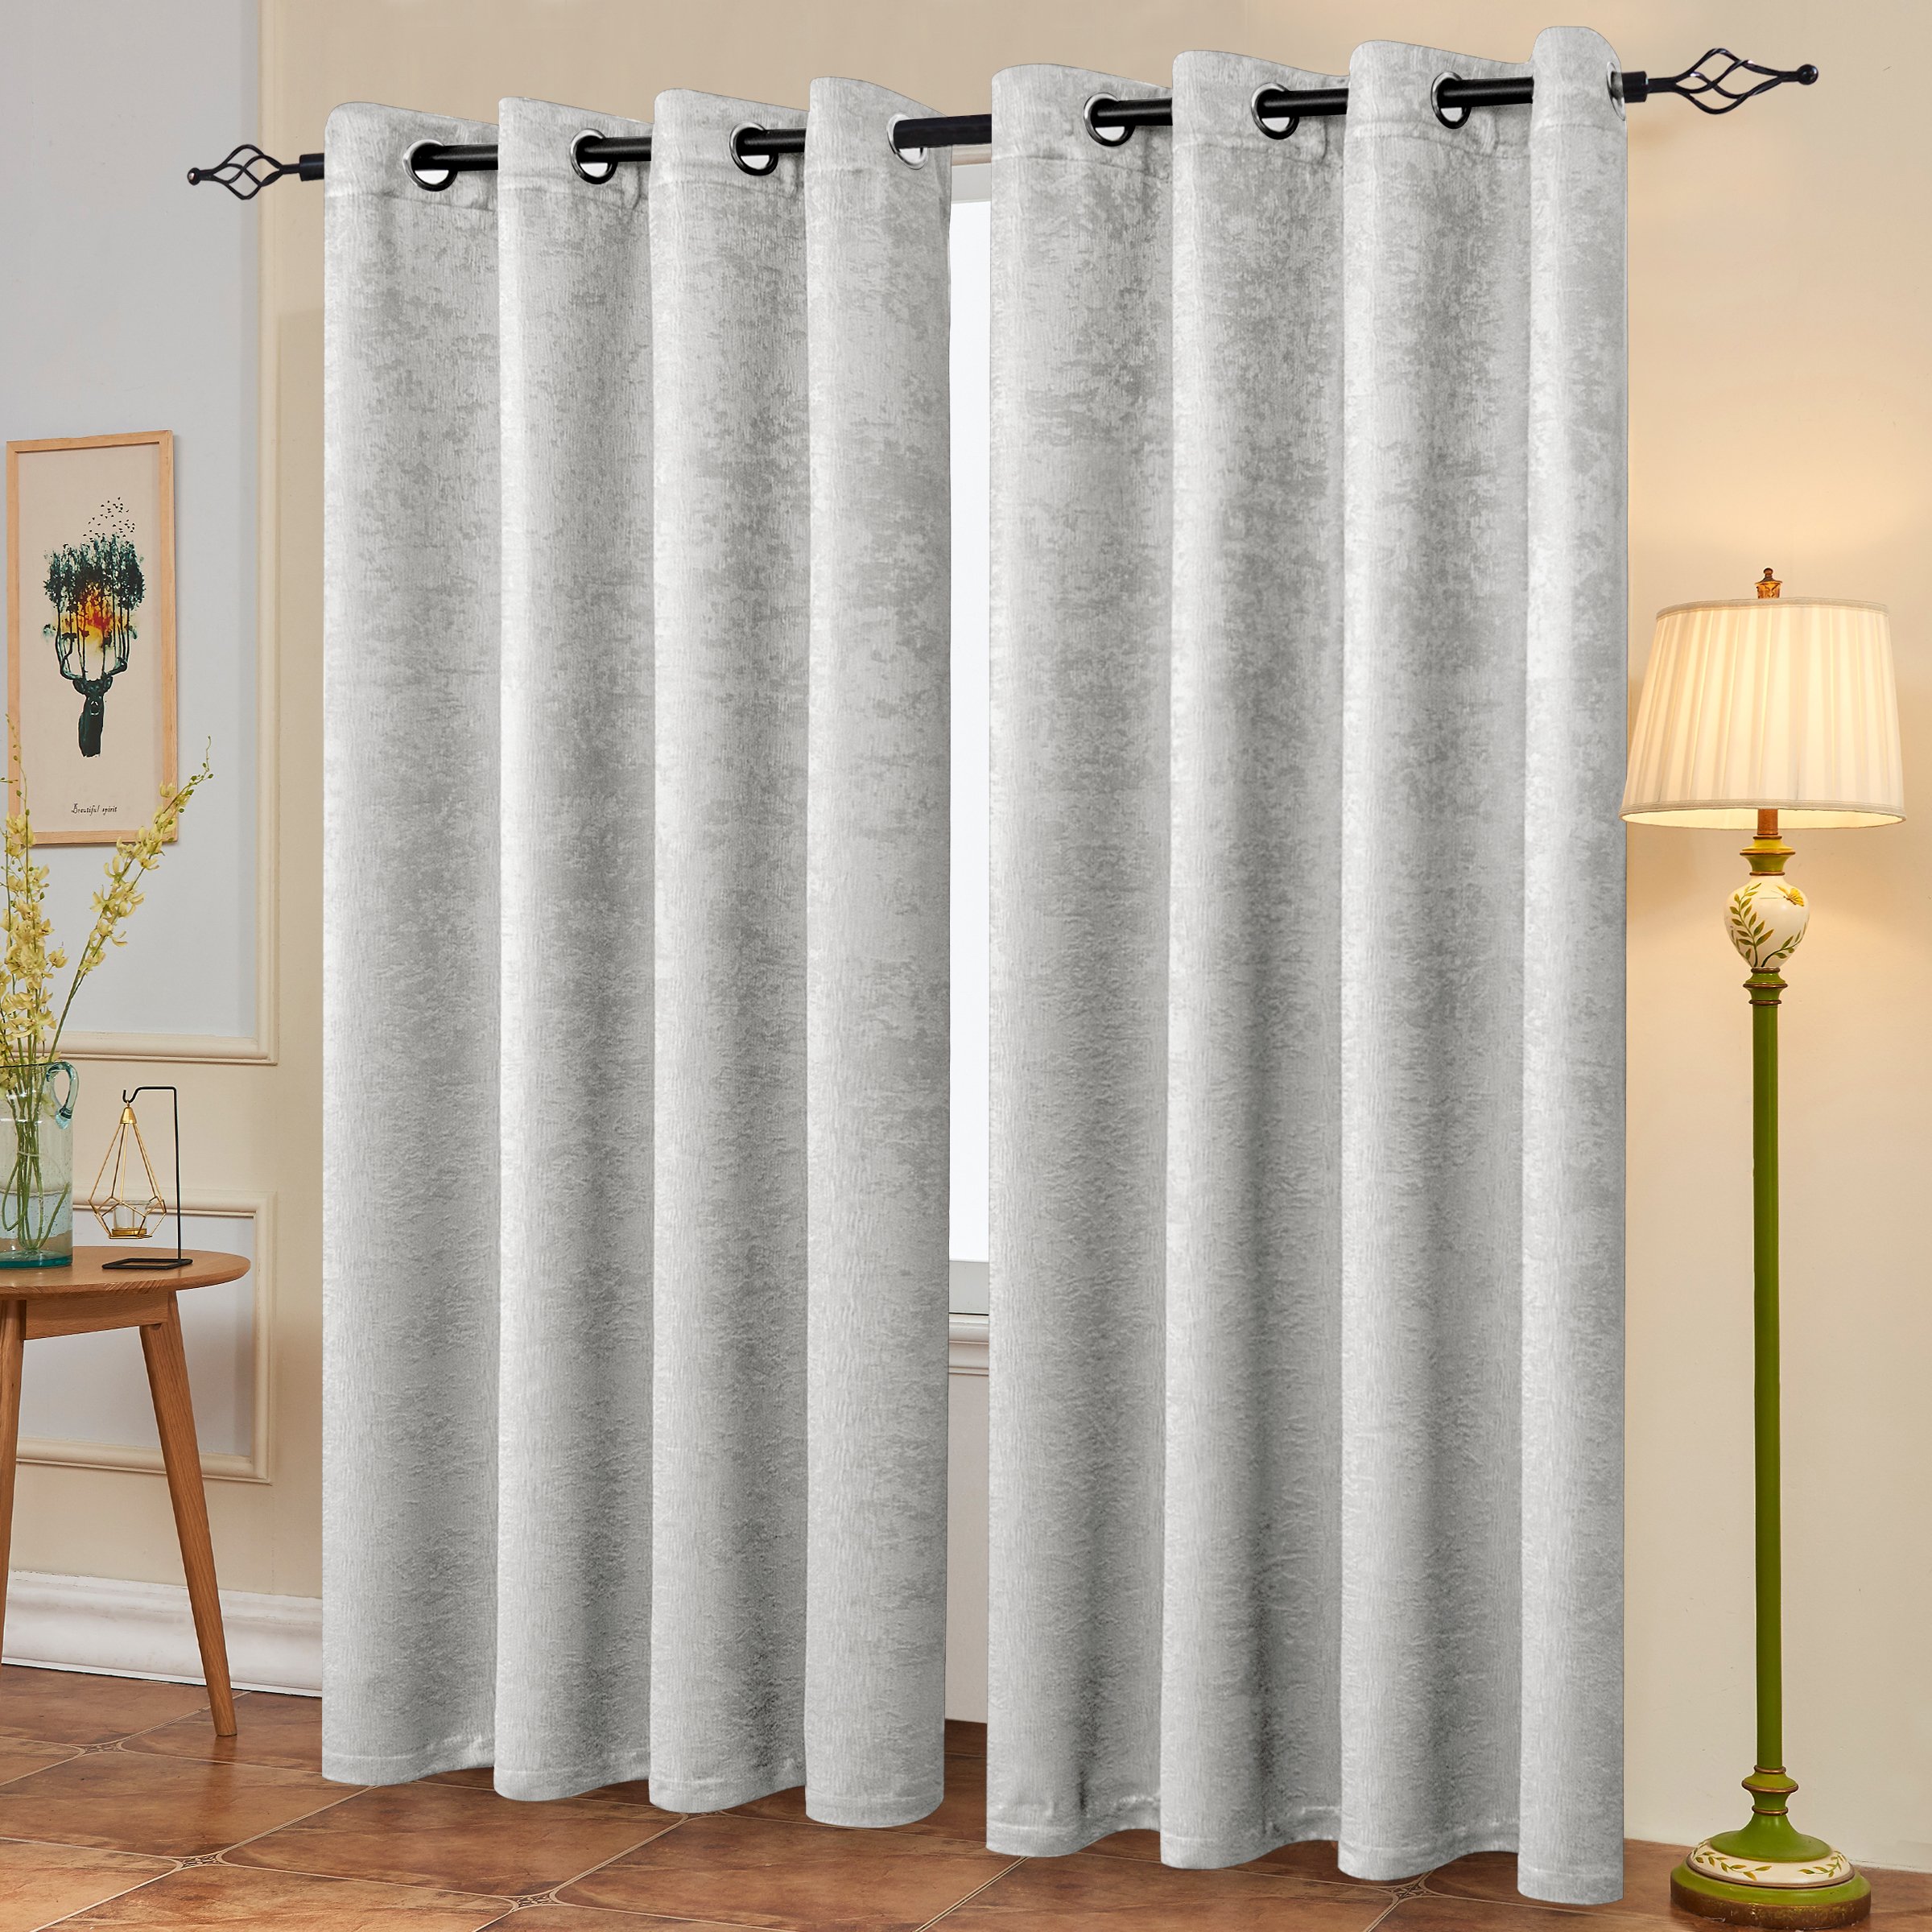 Subrtex Thermal Insulated Grommet Blackout Curtains for Bedroom, Set of 2 Panels, 53"×96", Greyish White - image 5 of 5